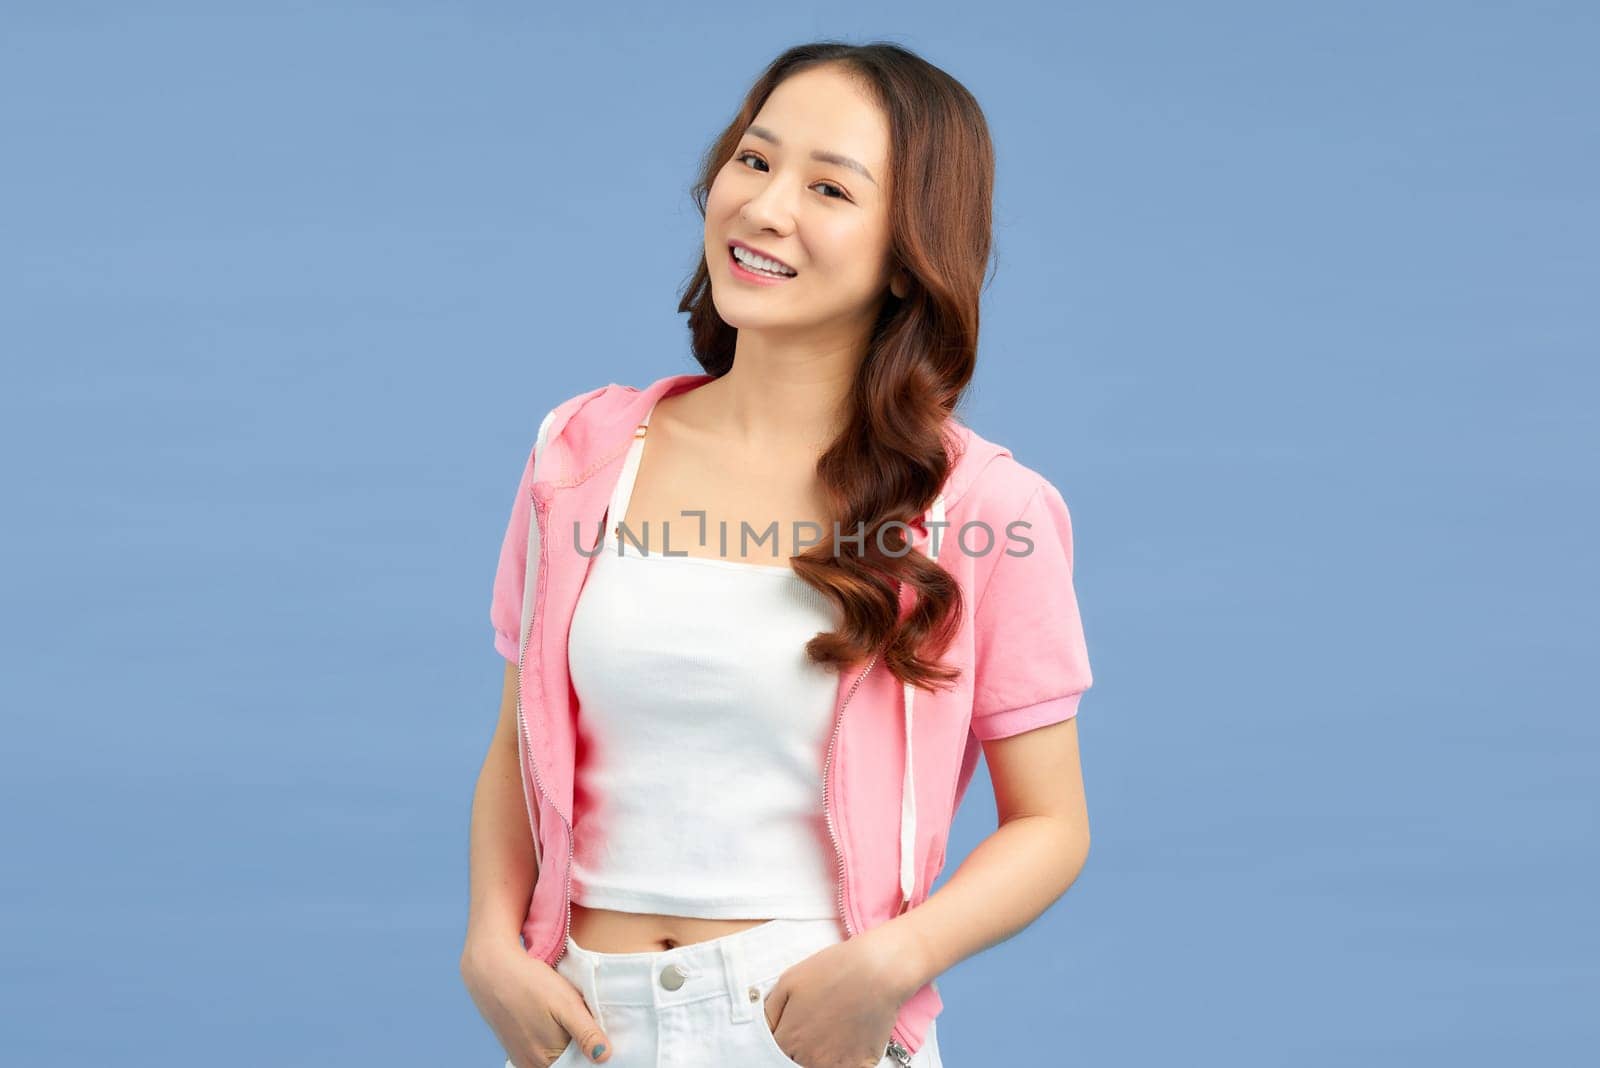 Beautiful woman in the template of a women's sweatshirt of pink color. Hands in pockets